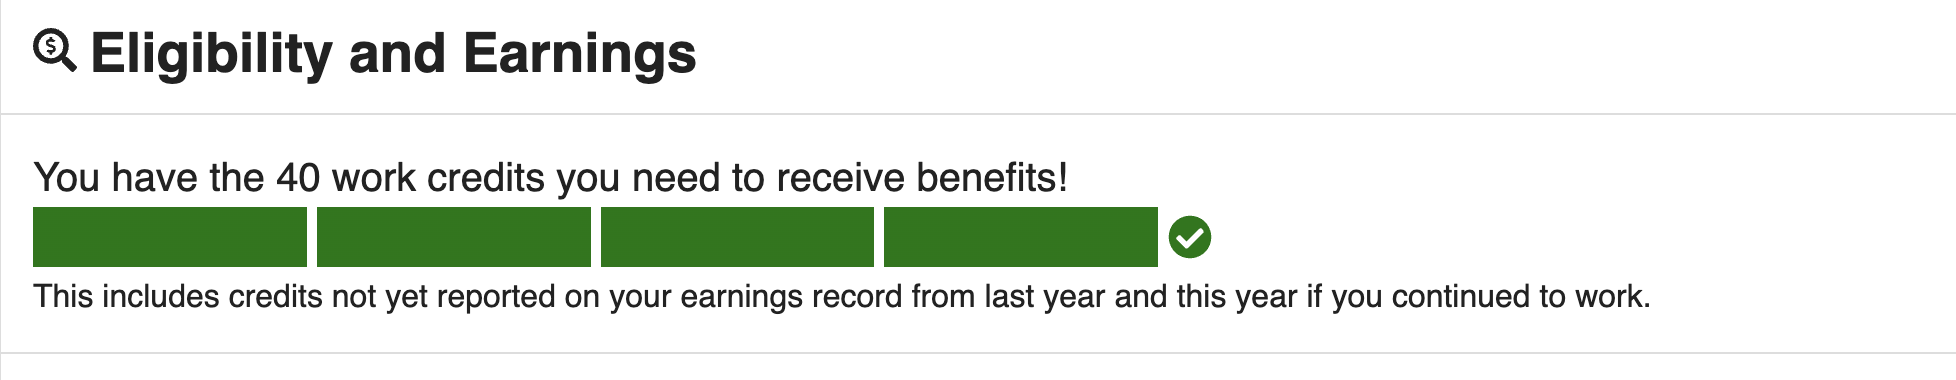 What the work-credit tracker in someone's mySocialSecurity account will show if they have earned the necessary 40 credits.